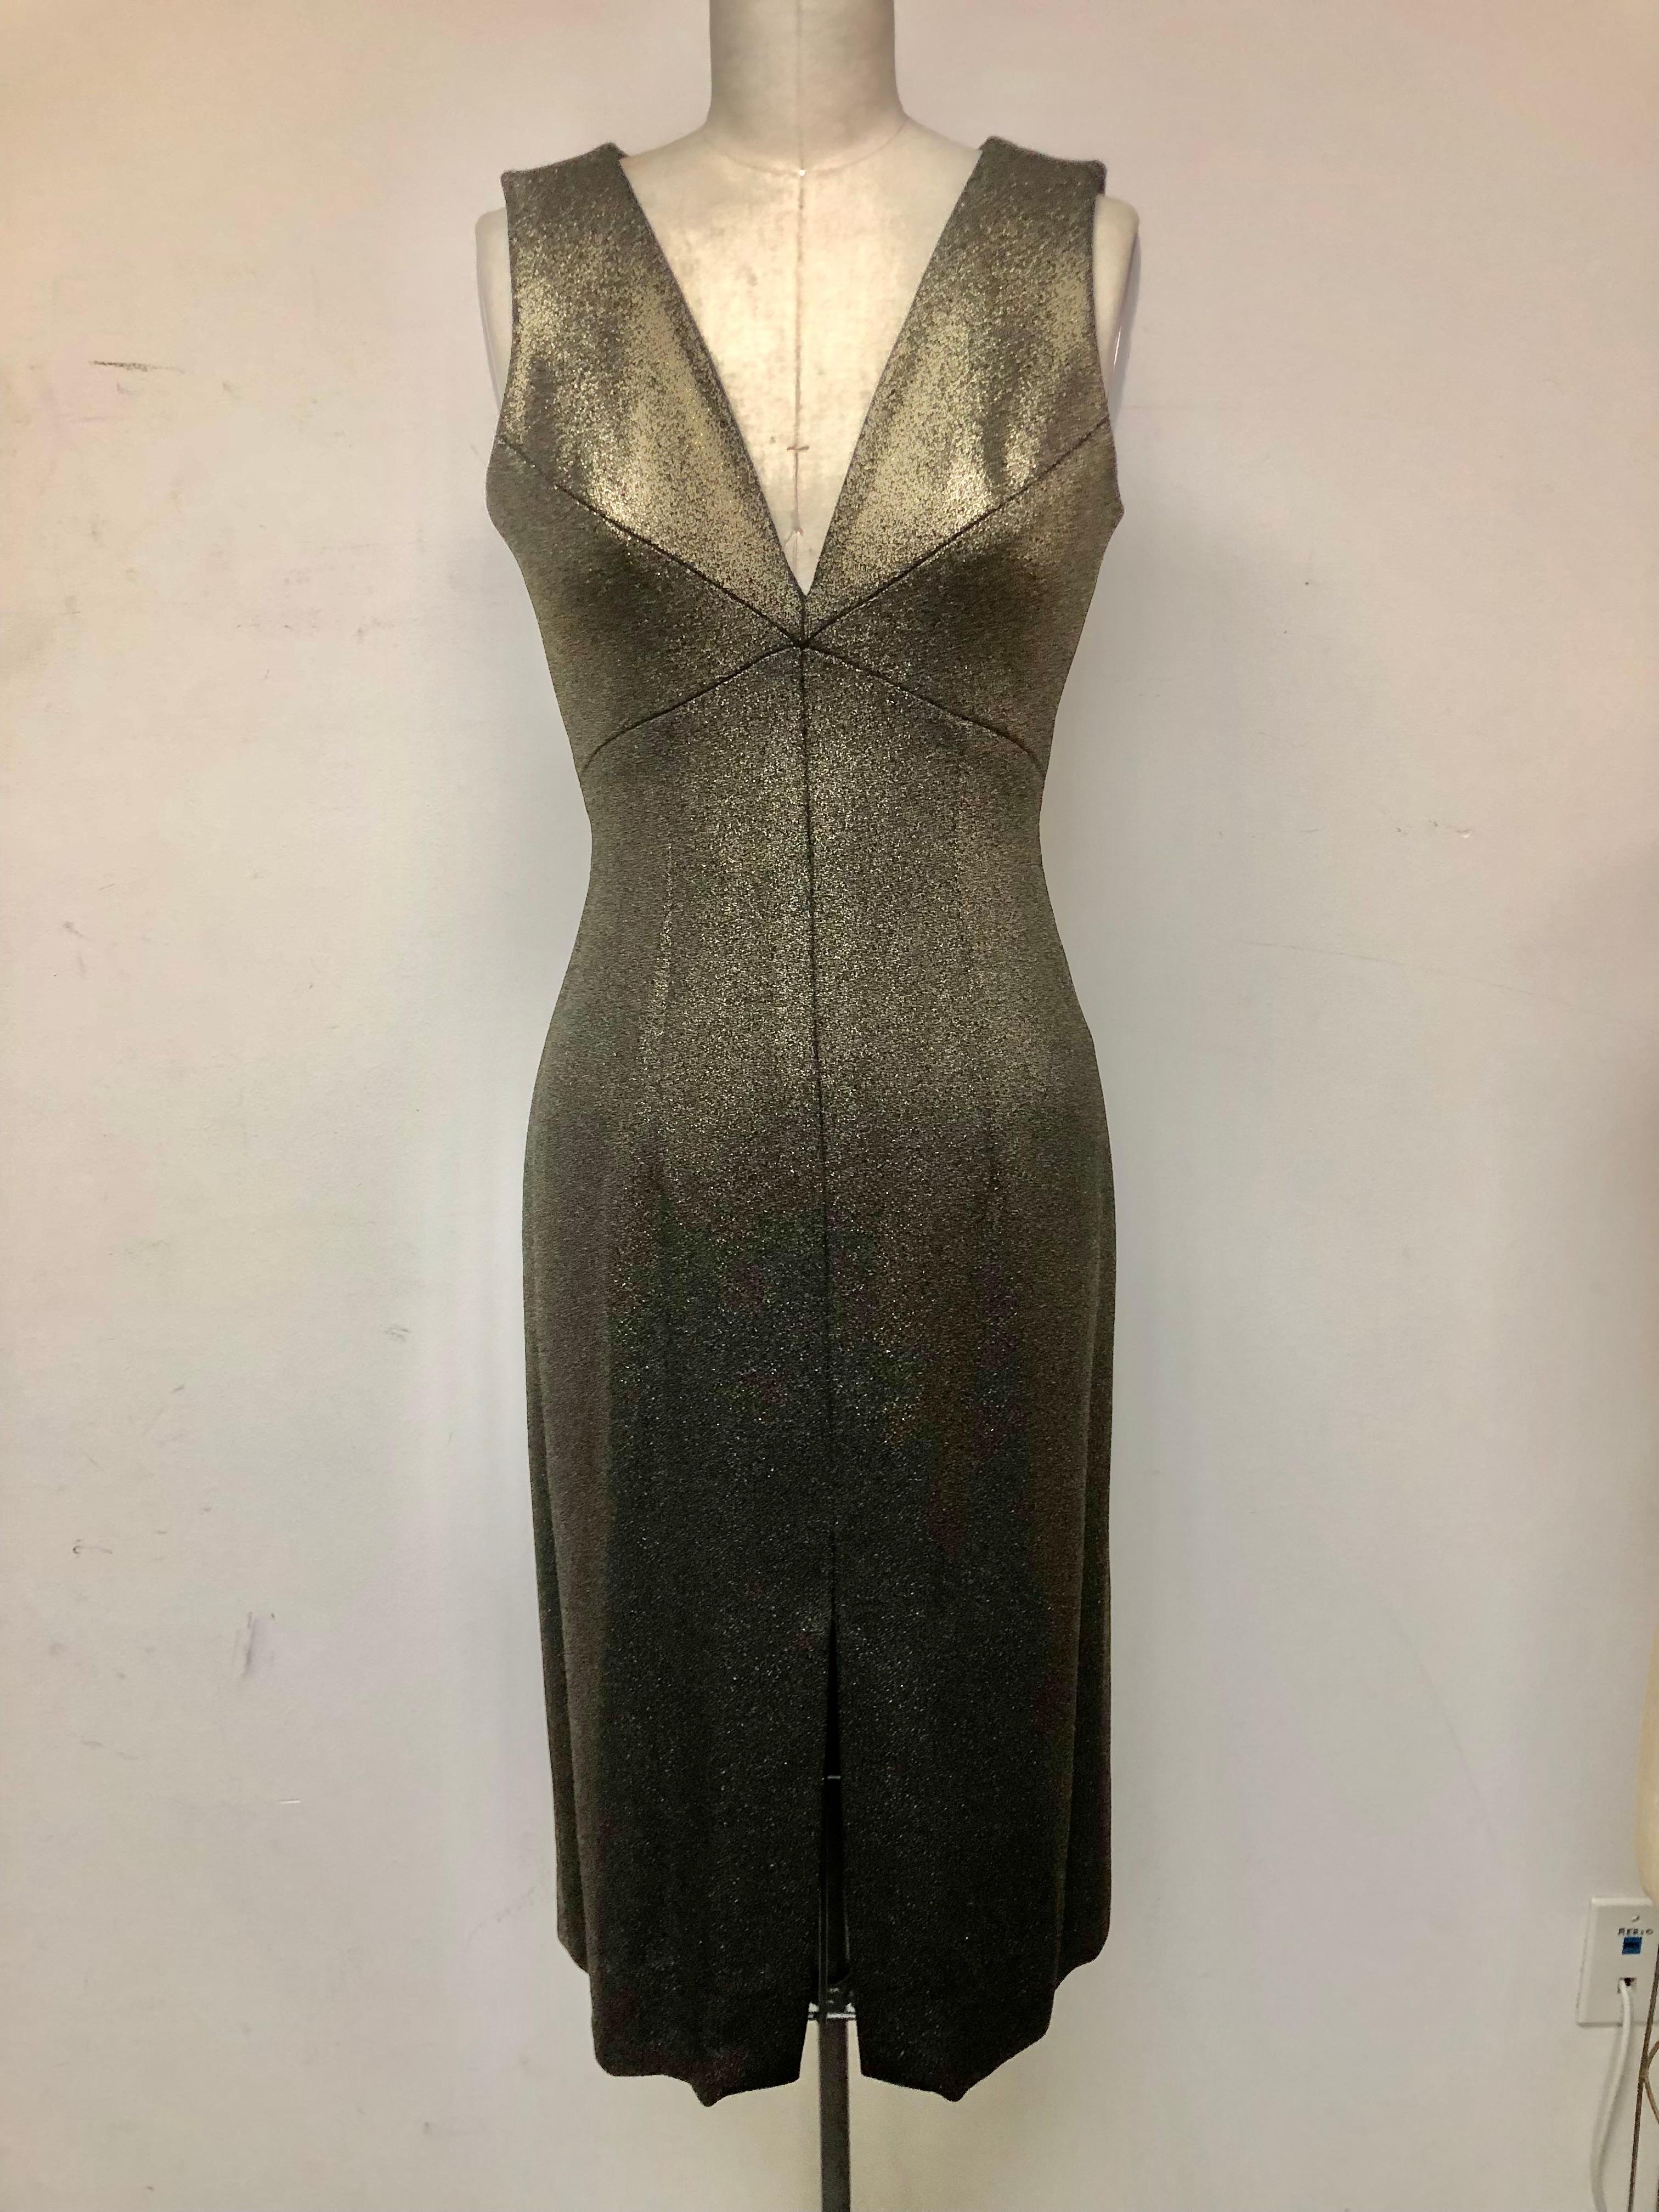  Plunging V Neck Body Dress in Luxurious Taroni Gold Lame In Excellent Condition For Sale In Los Angeles, CA